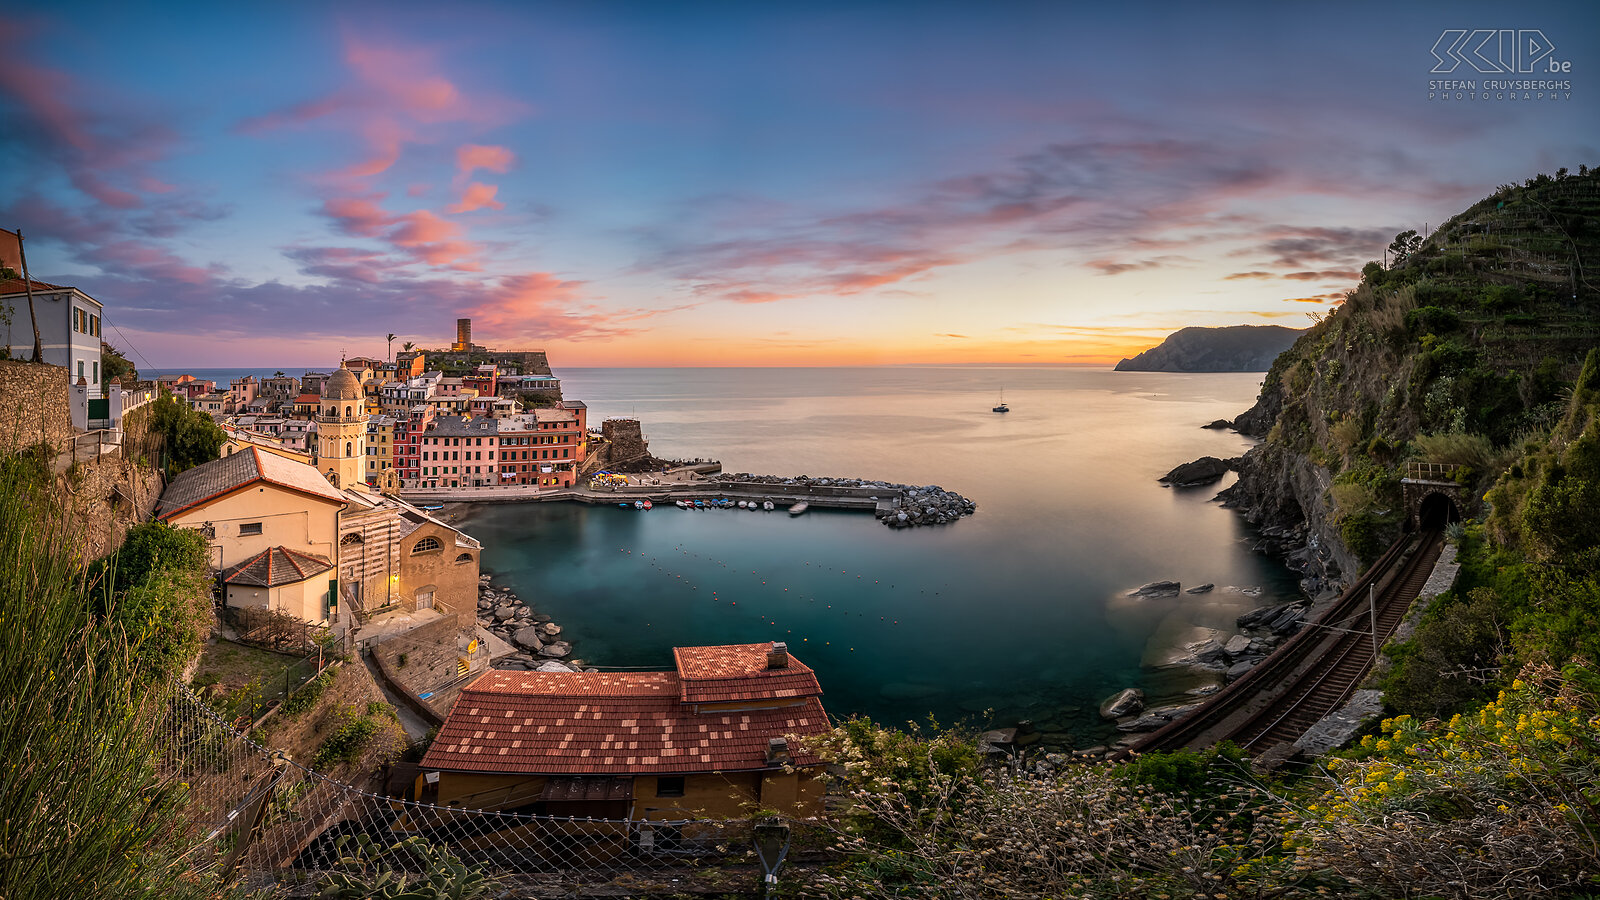 Vernazza - Sunset Panorama image of the beautiful village of Vernazza in Cinque Terre just after sunset Stefan Cruysberghs